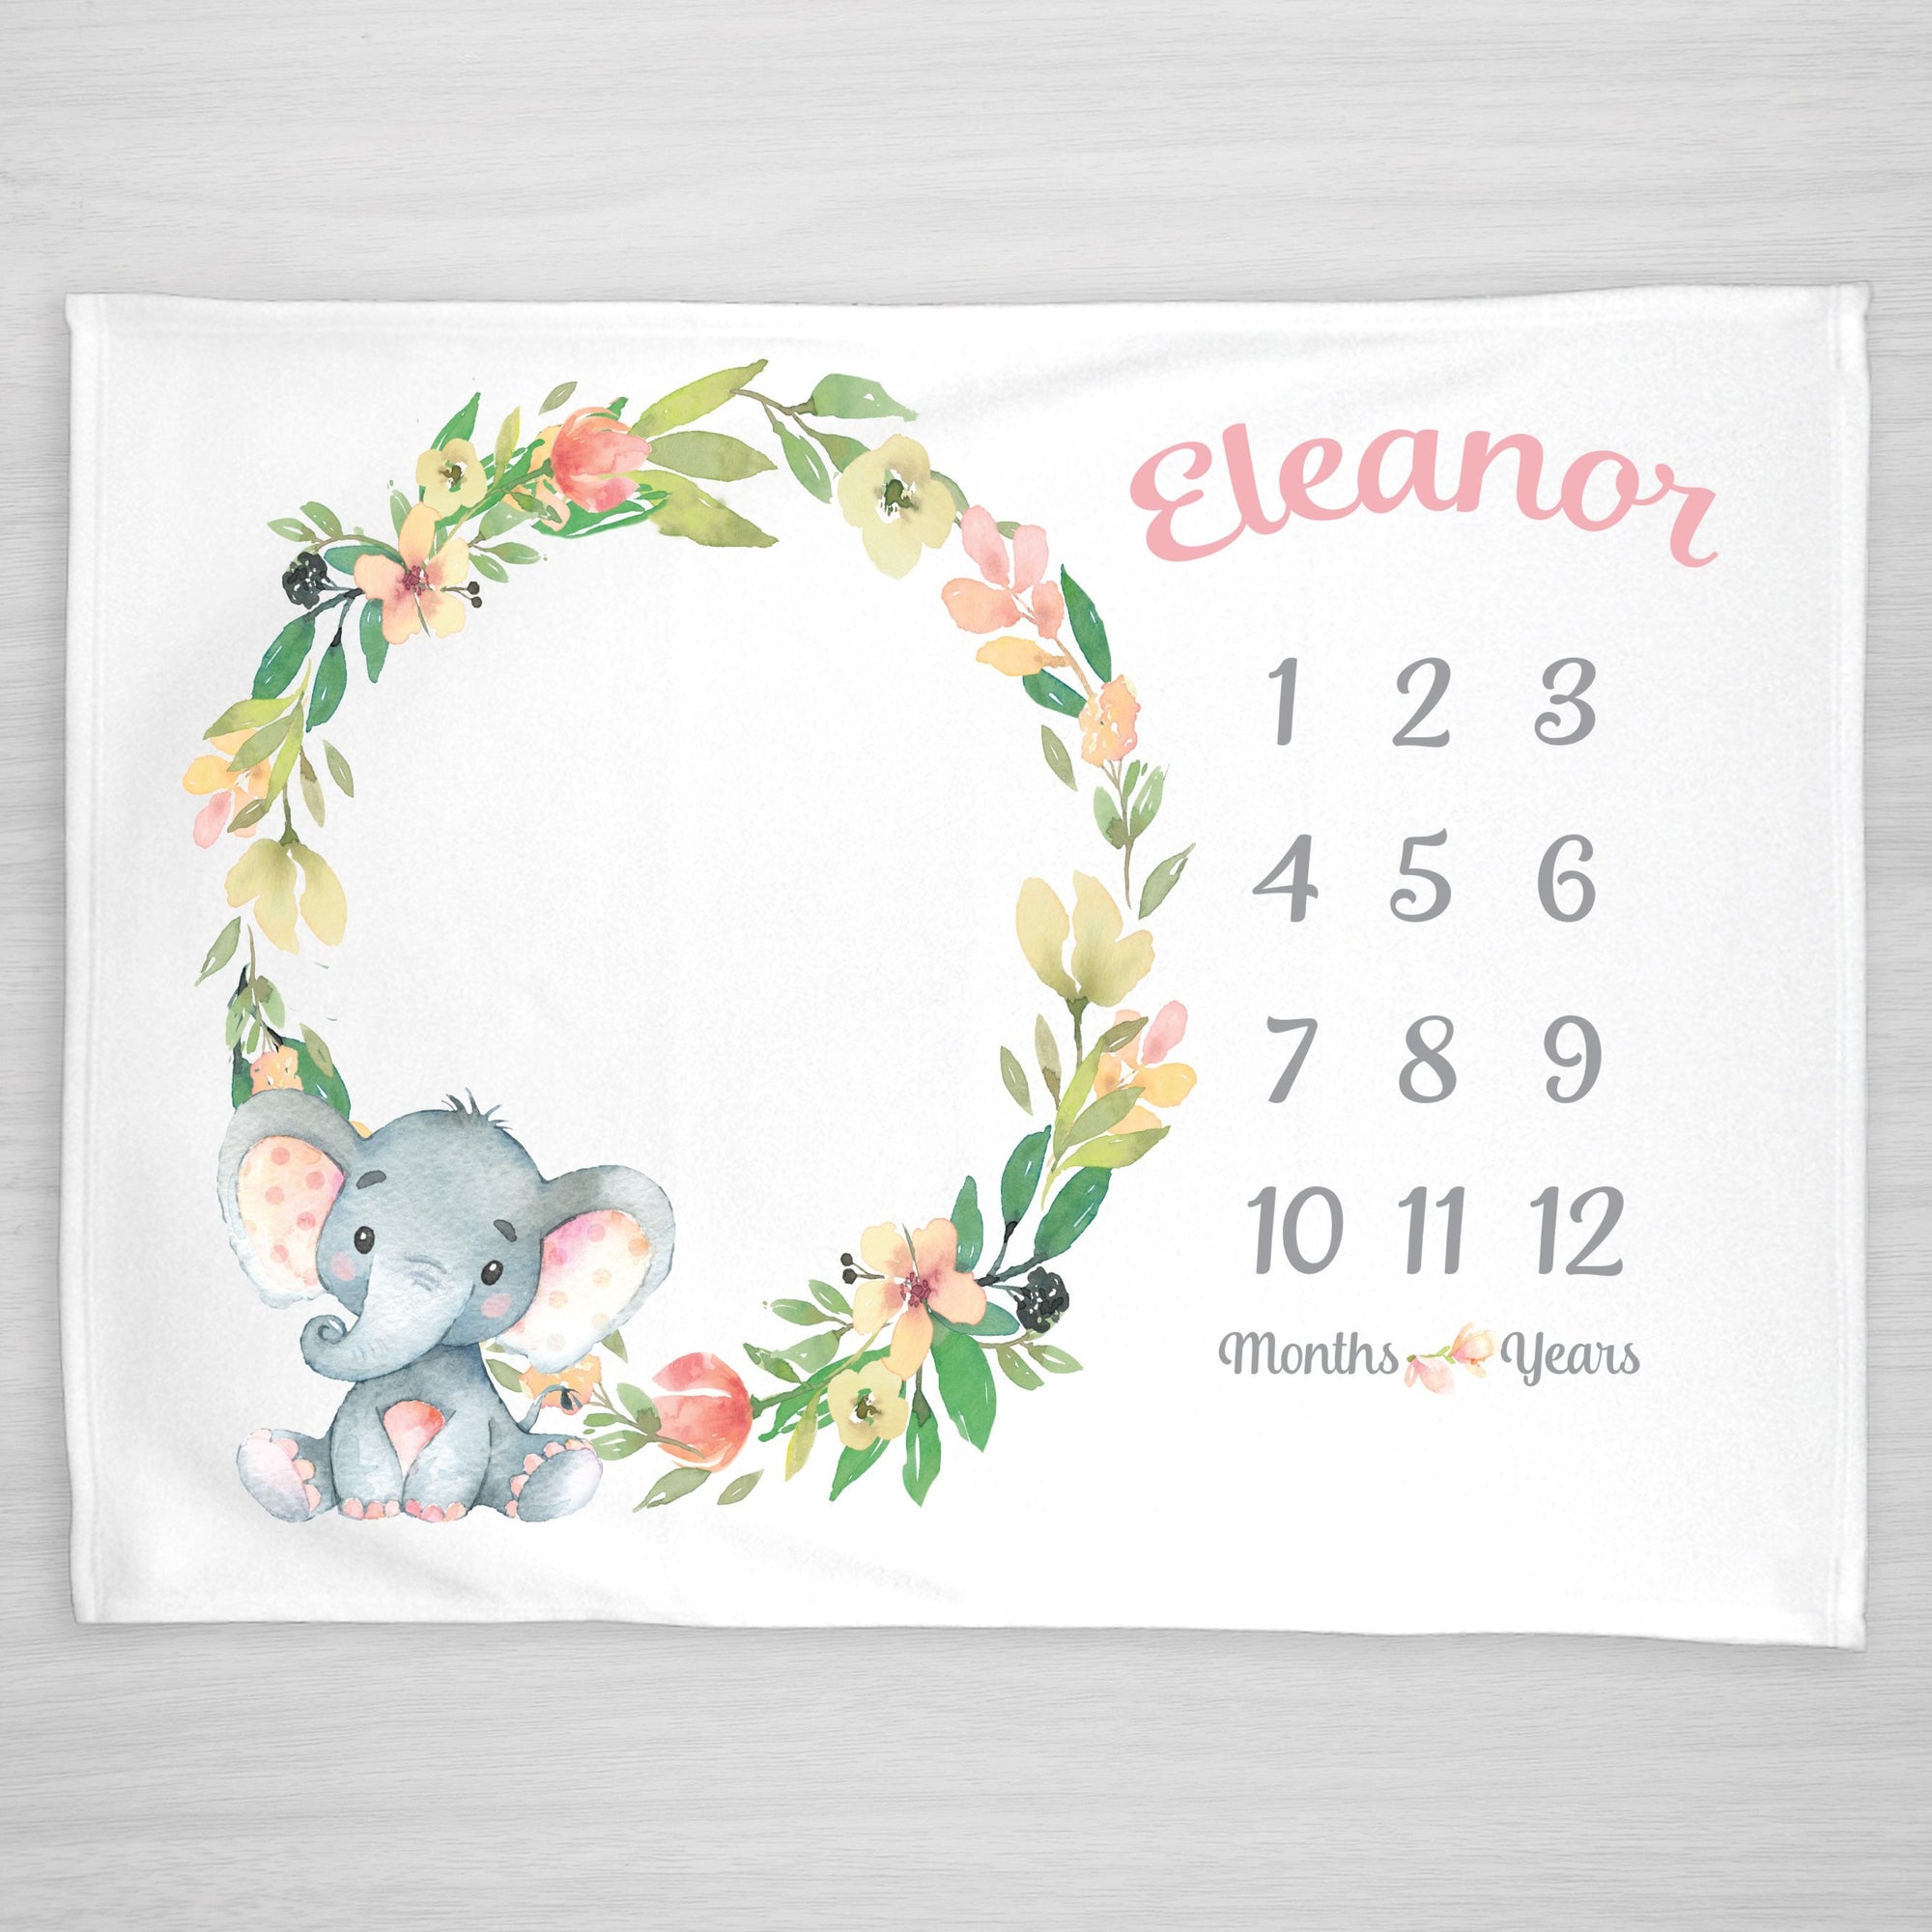 Elephant Floral Wreath Milestone Blanket, Personalized in Pink